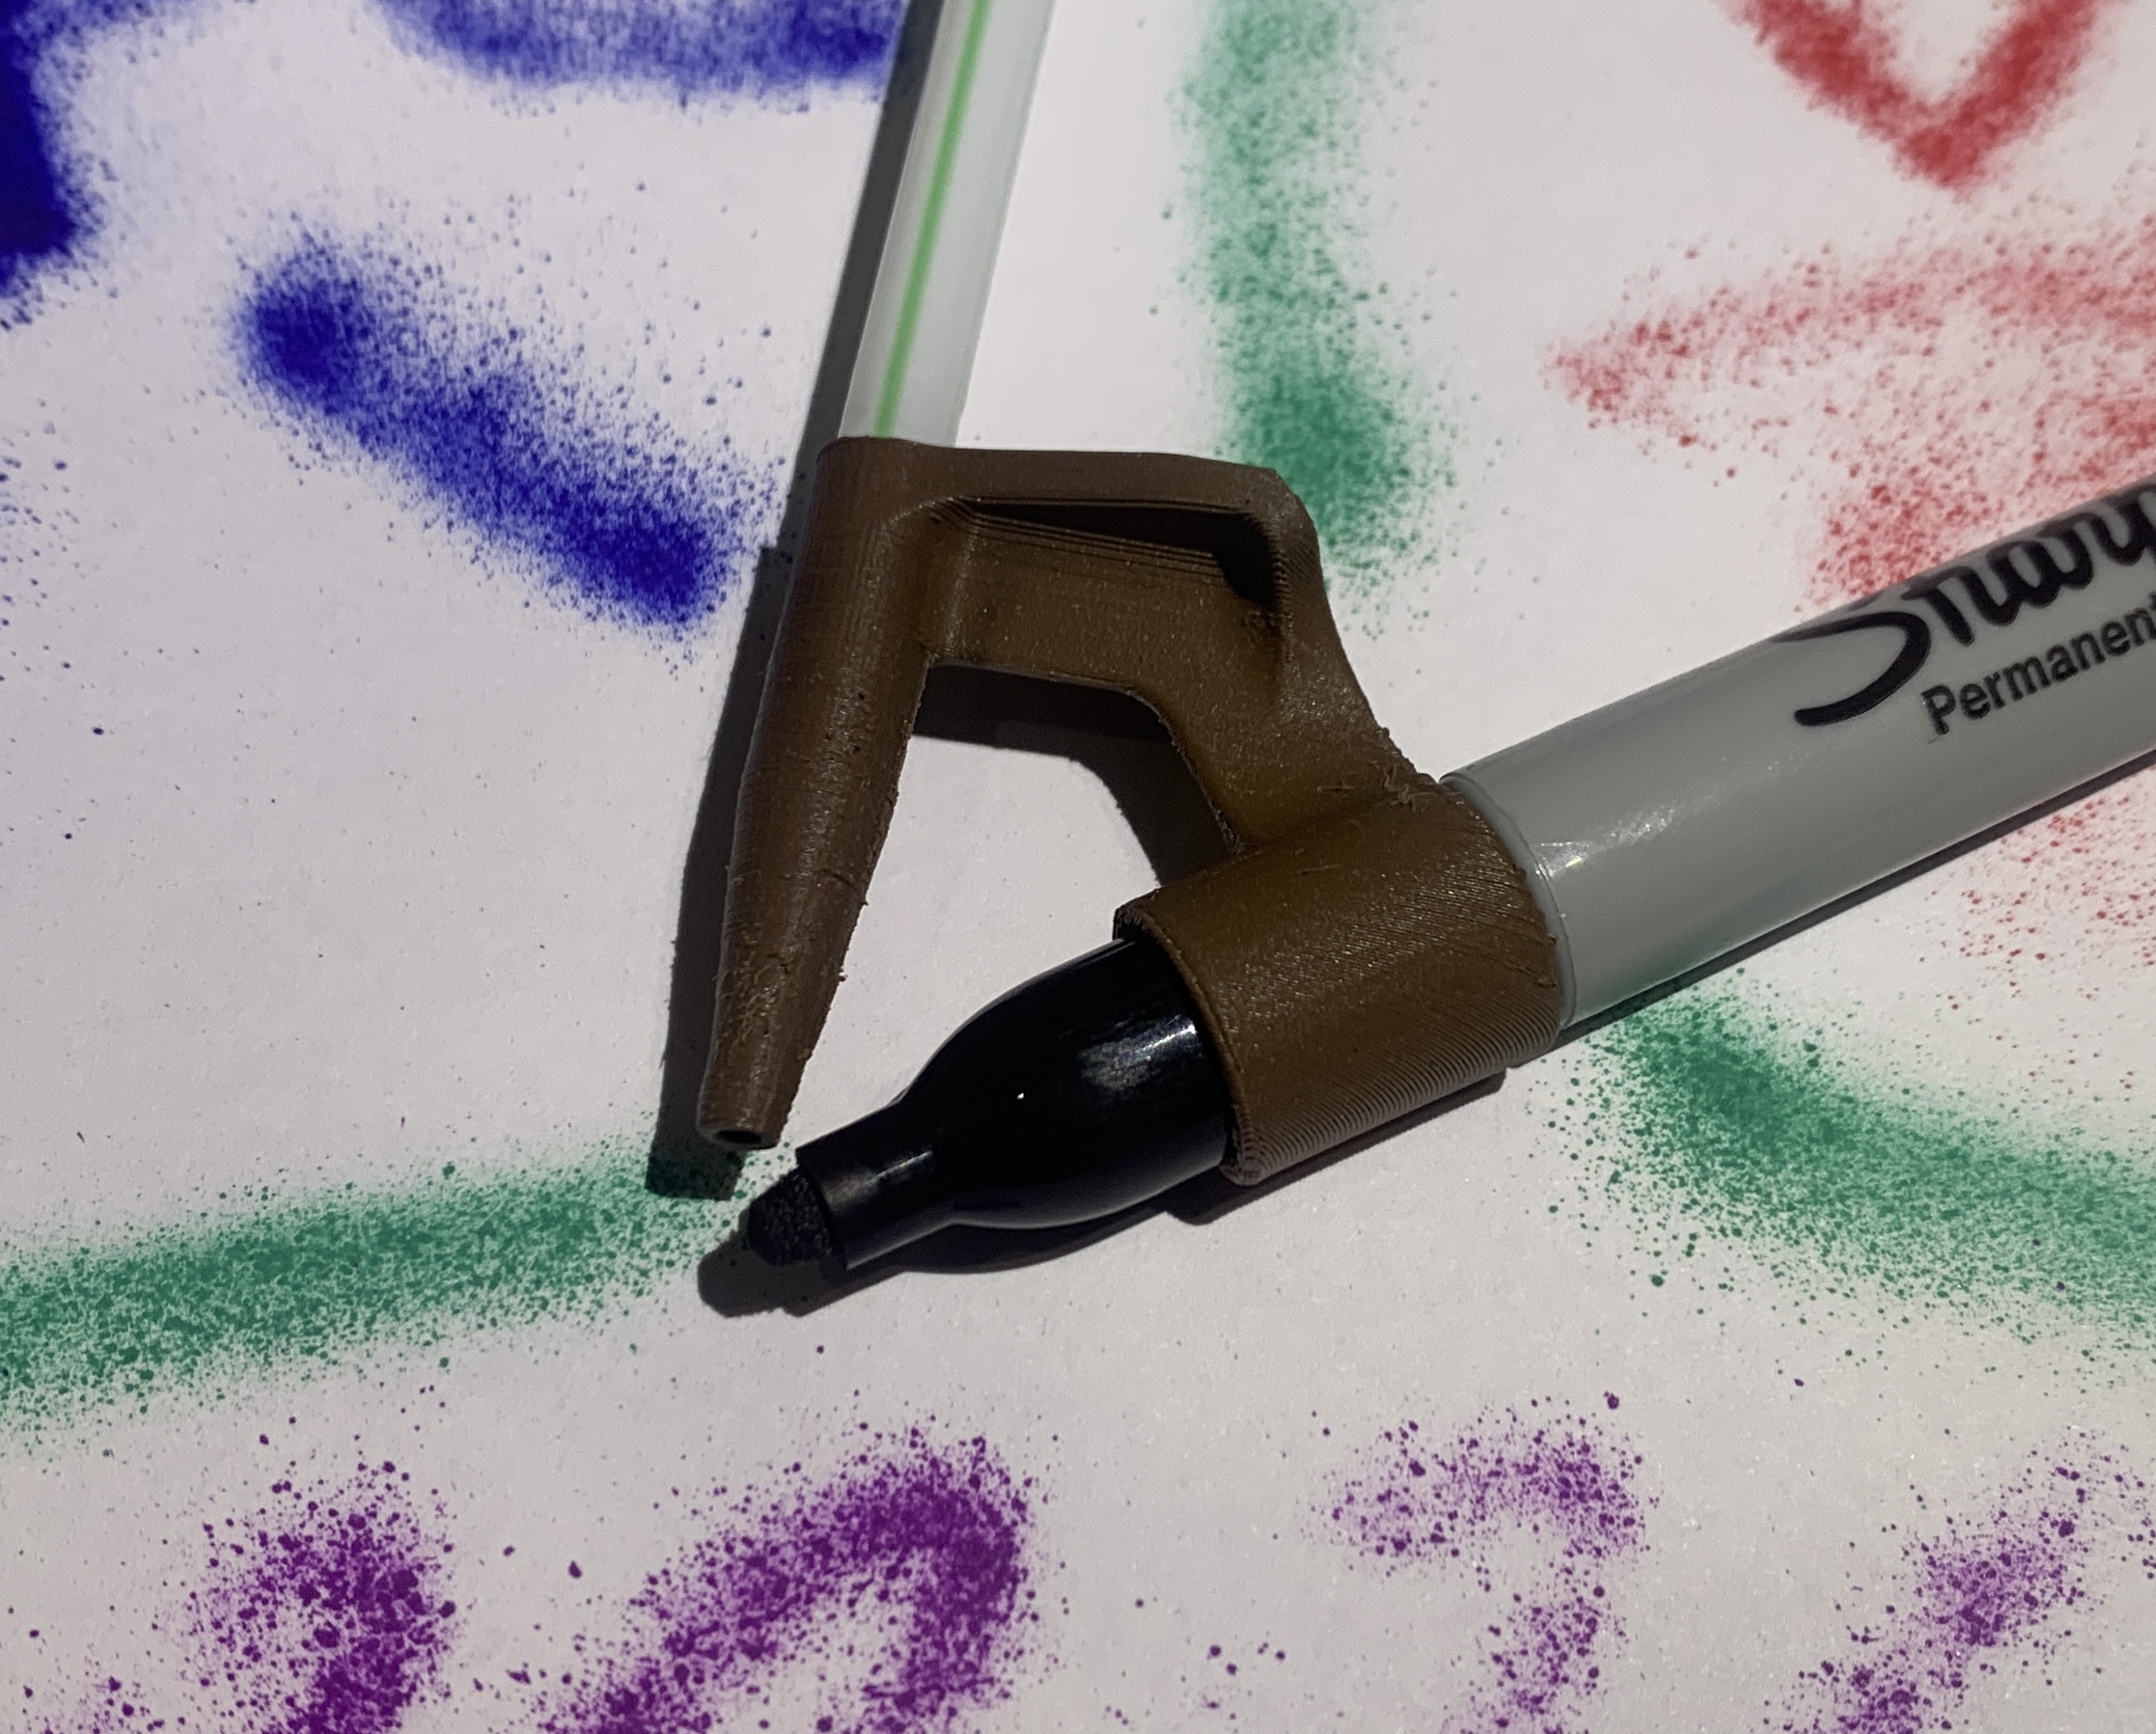 Airbrush Mod for Sharpies